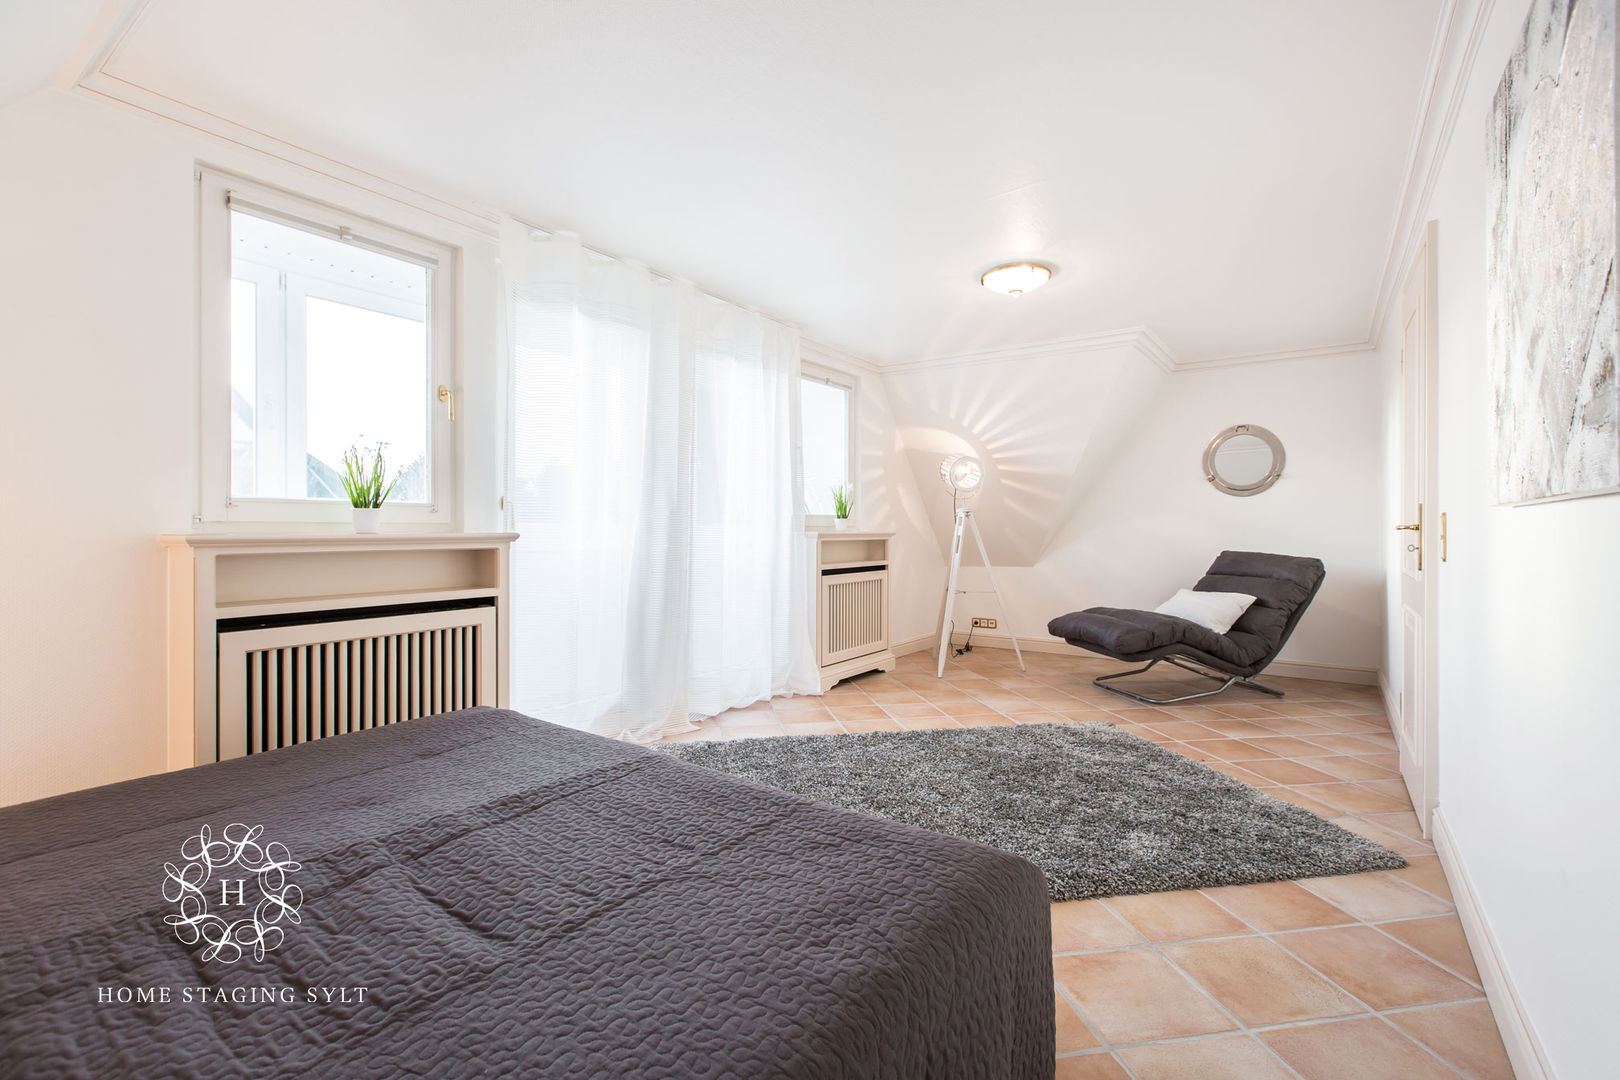 Home Staging Doppelhaus in Westerland/Sylt, Home Staging Sylt GmbH Home Staging Sylt GmbH Спальня